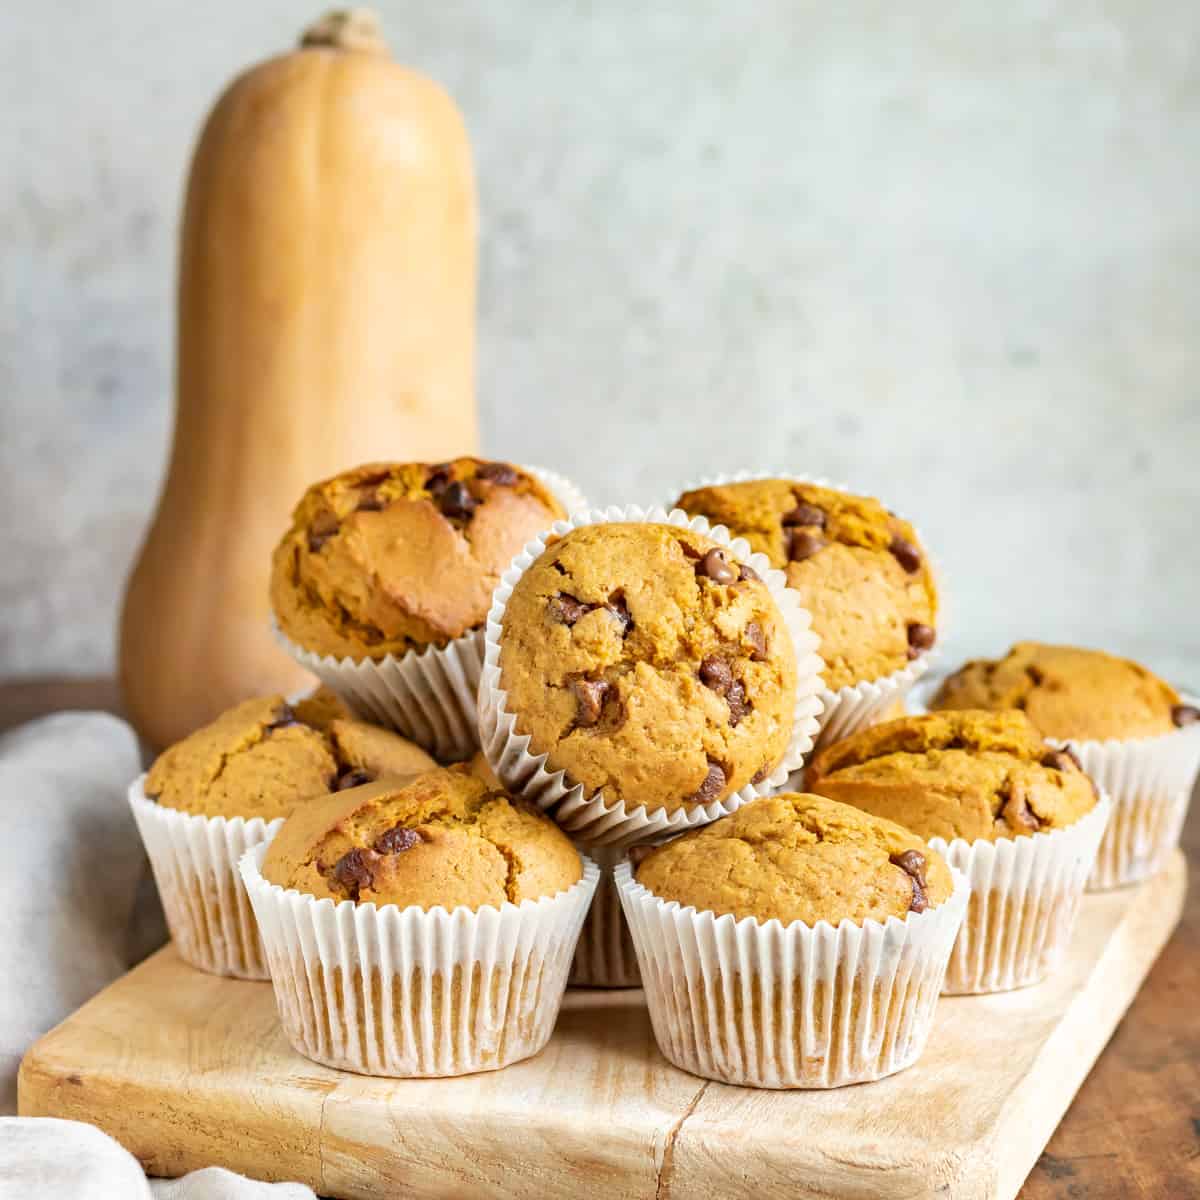 A pile of muffins in front of a butternut squash.